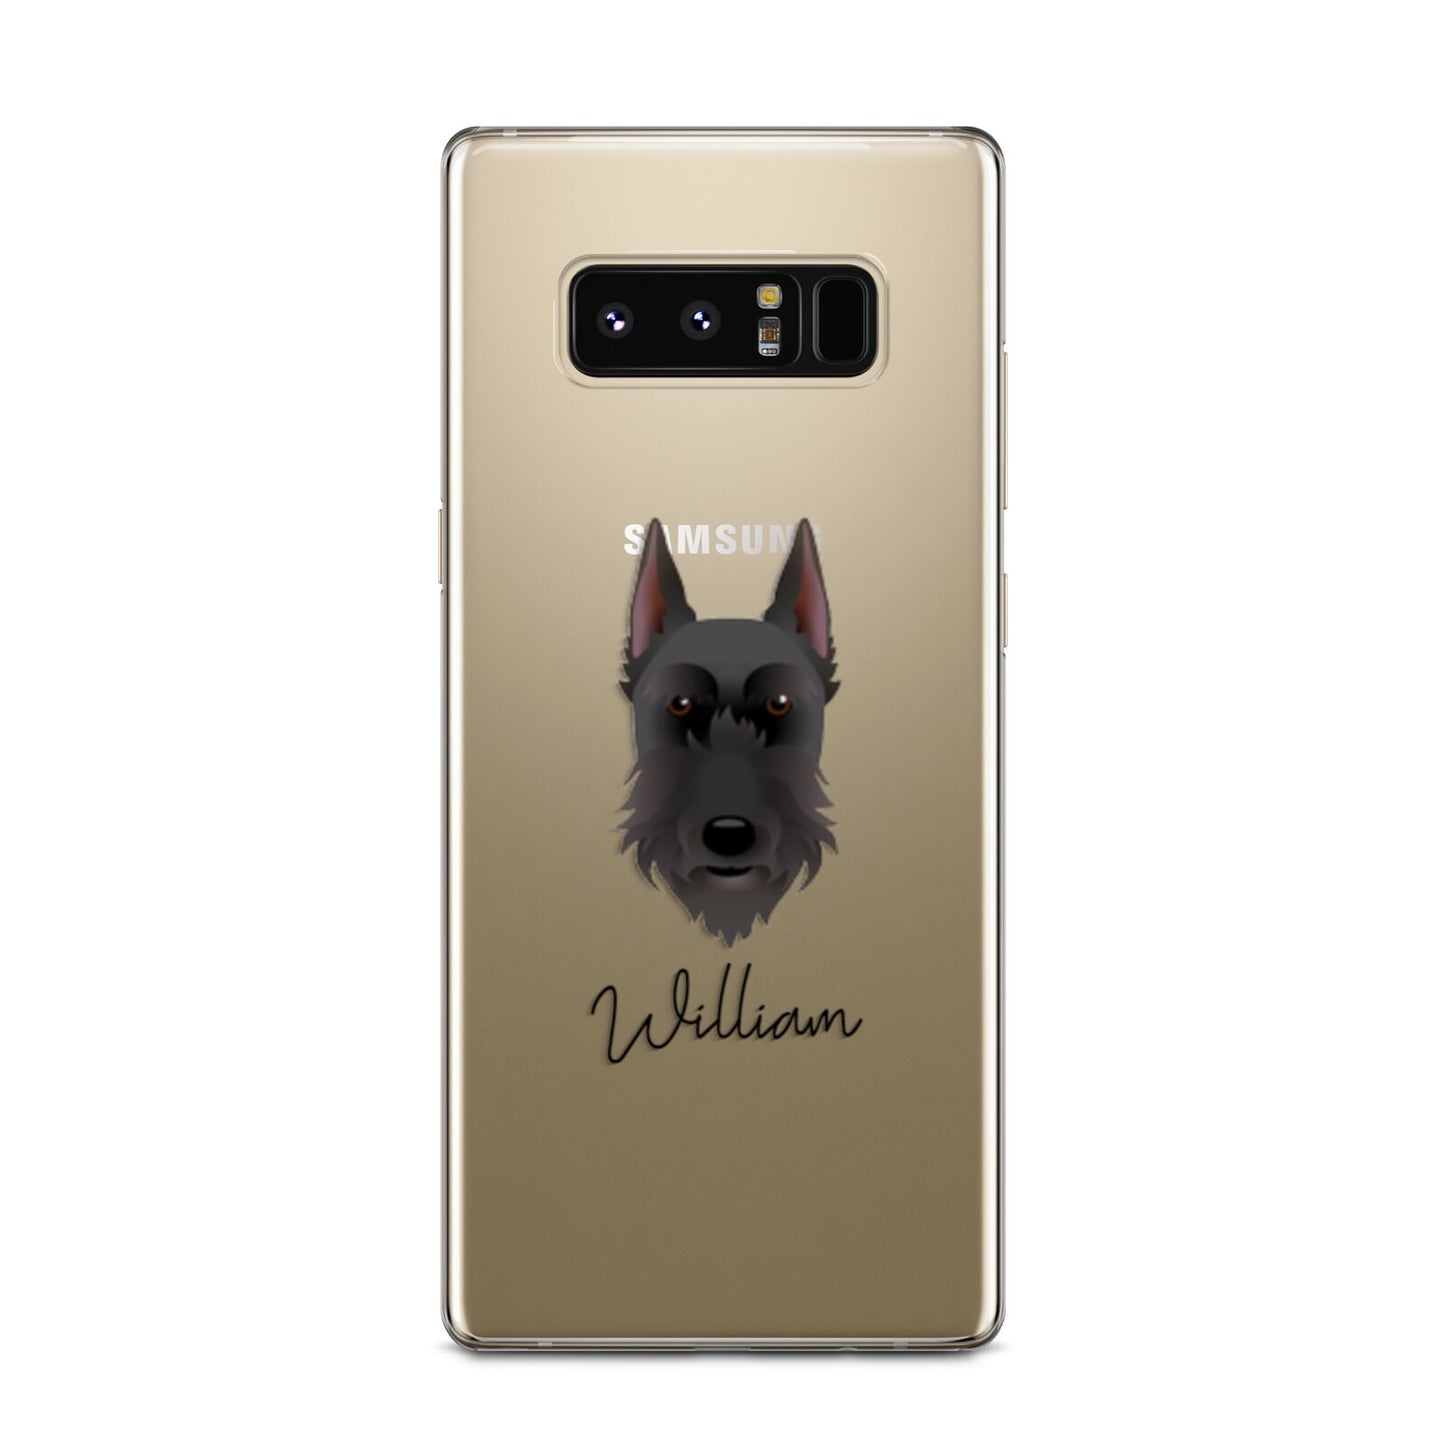 Giant Schnauzer Personalised Samsung Galaxy Note 8 Case